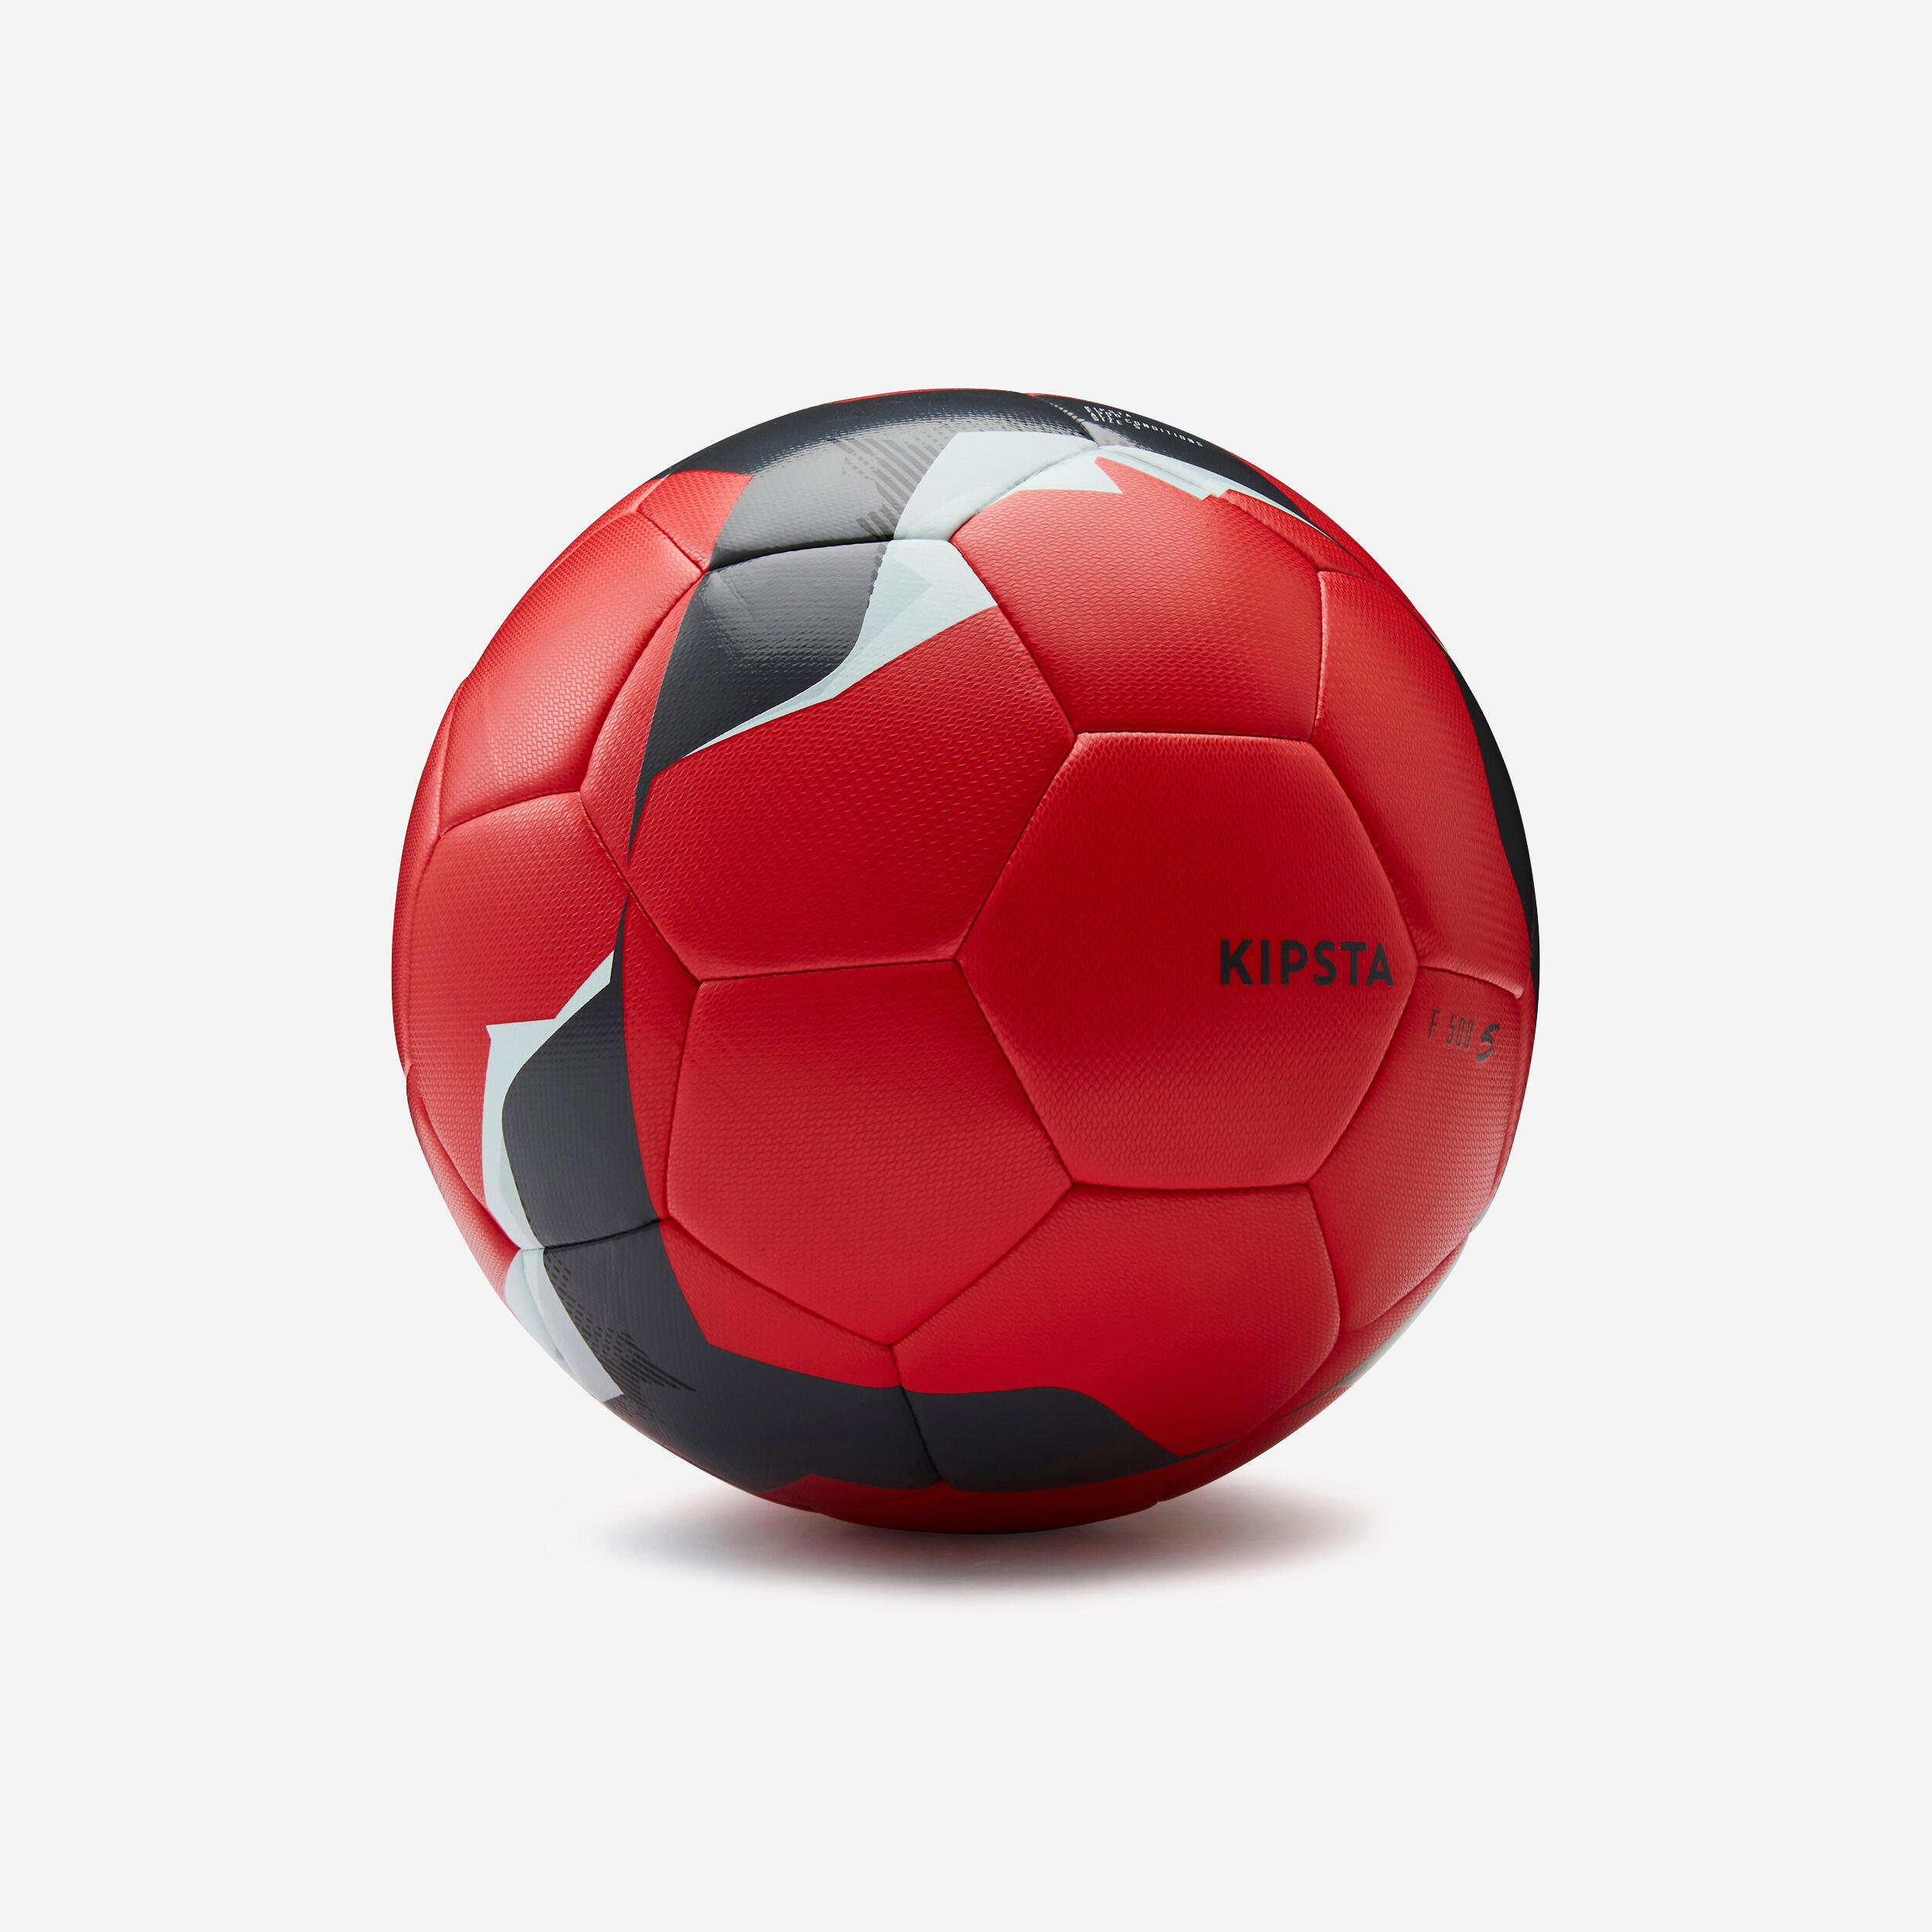 Adult size 5 fifa hybrid football, red 1/7